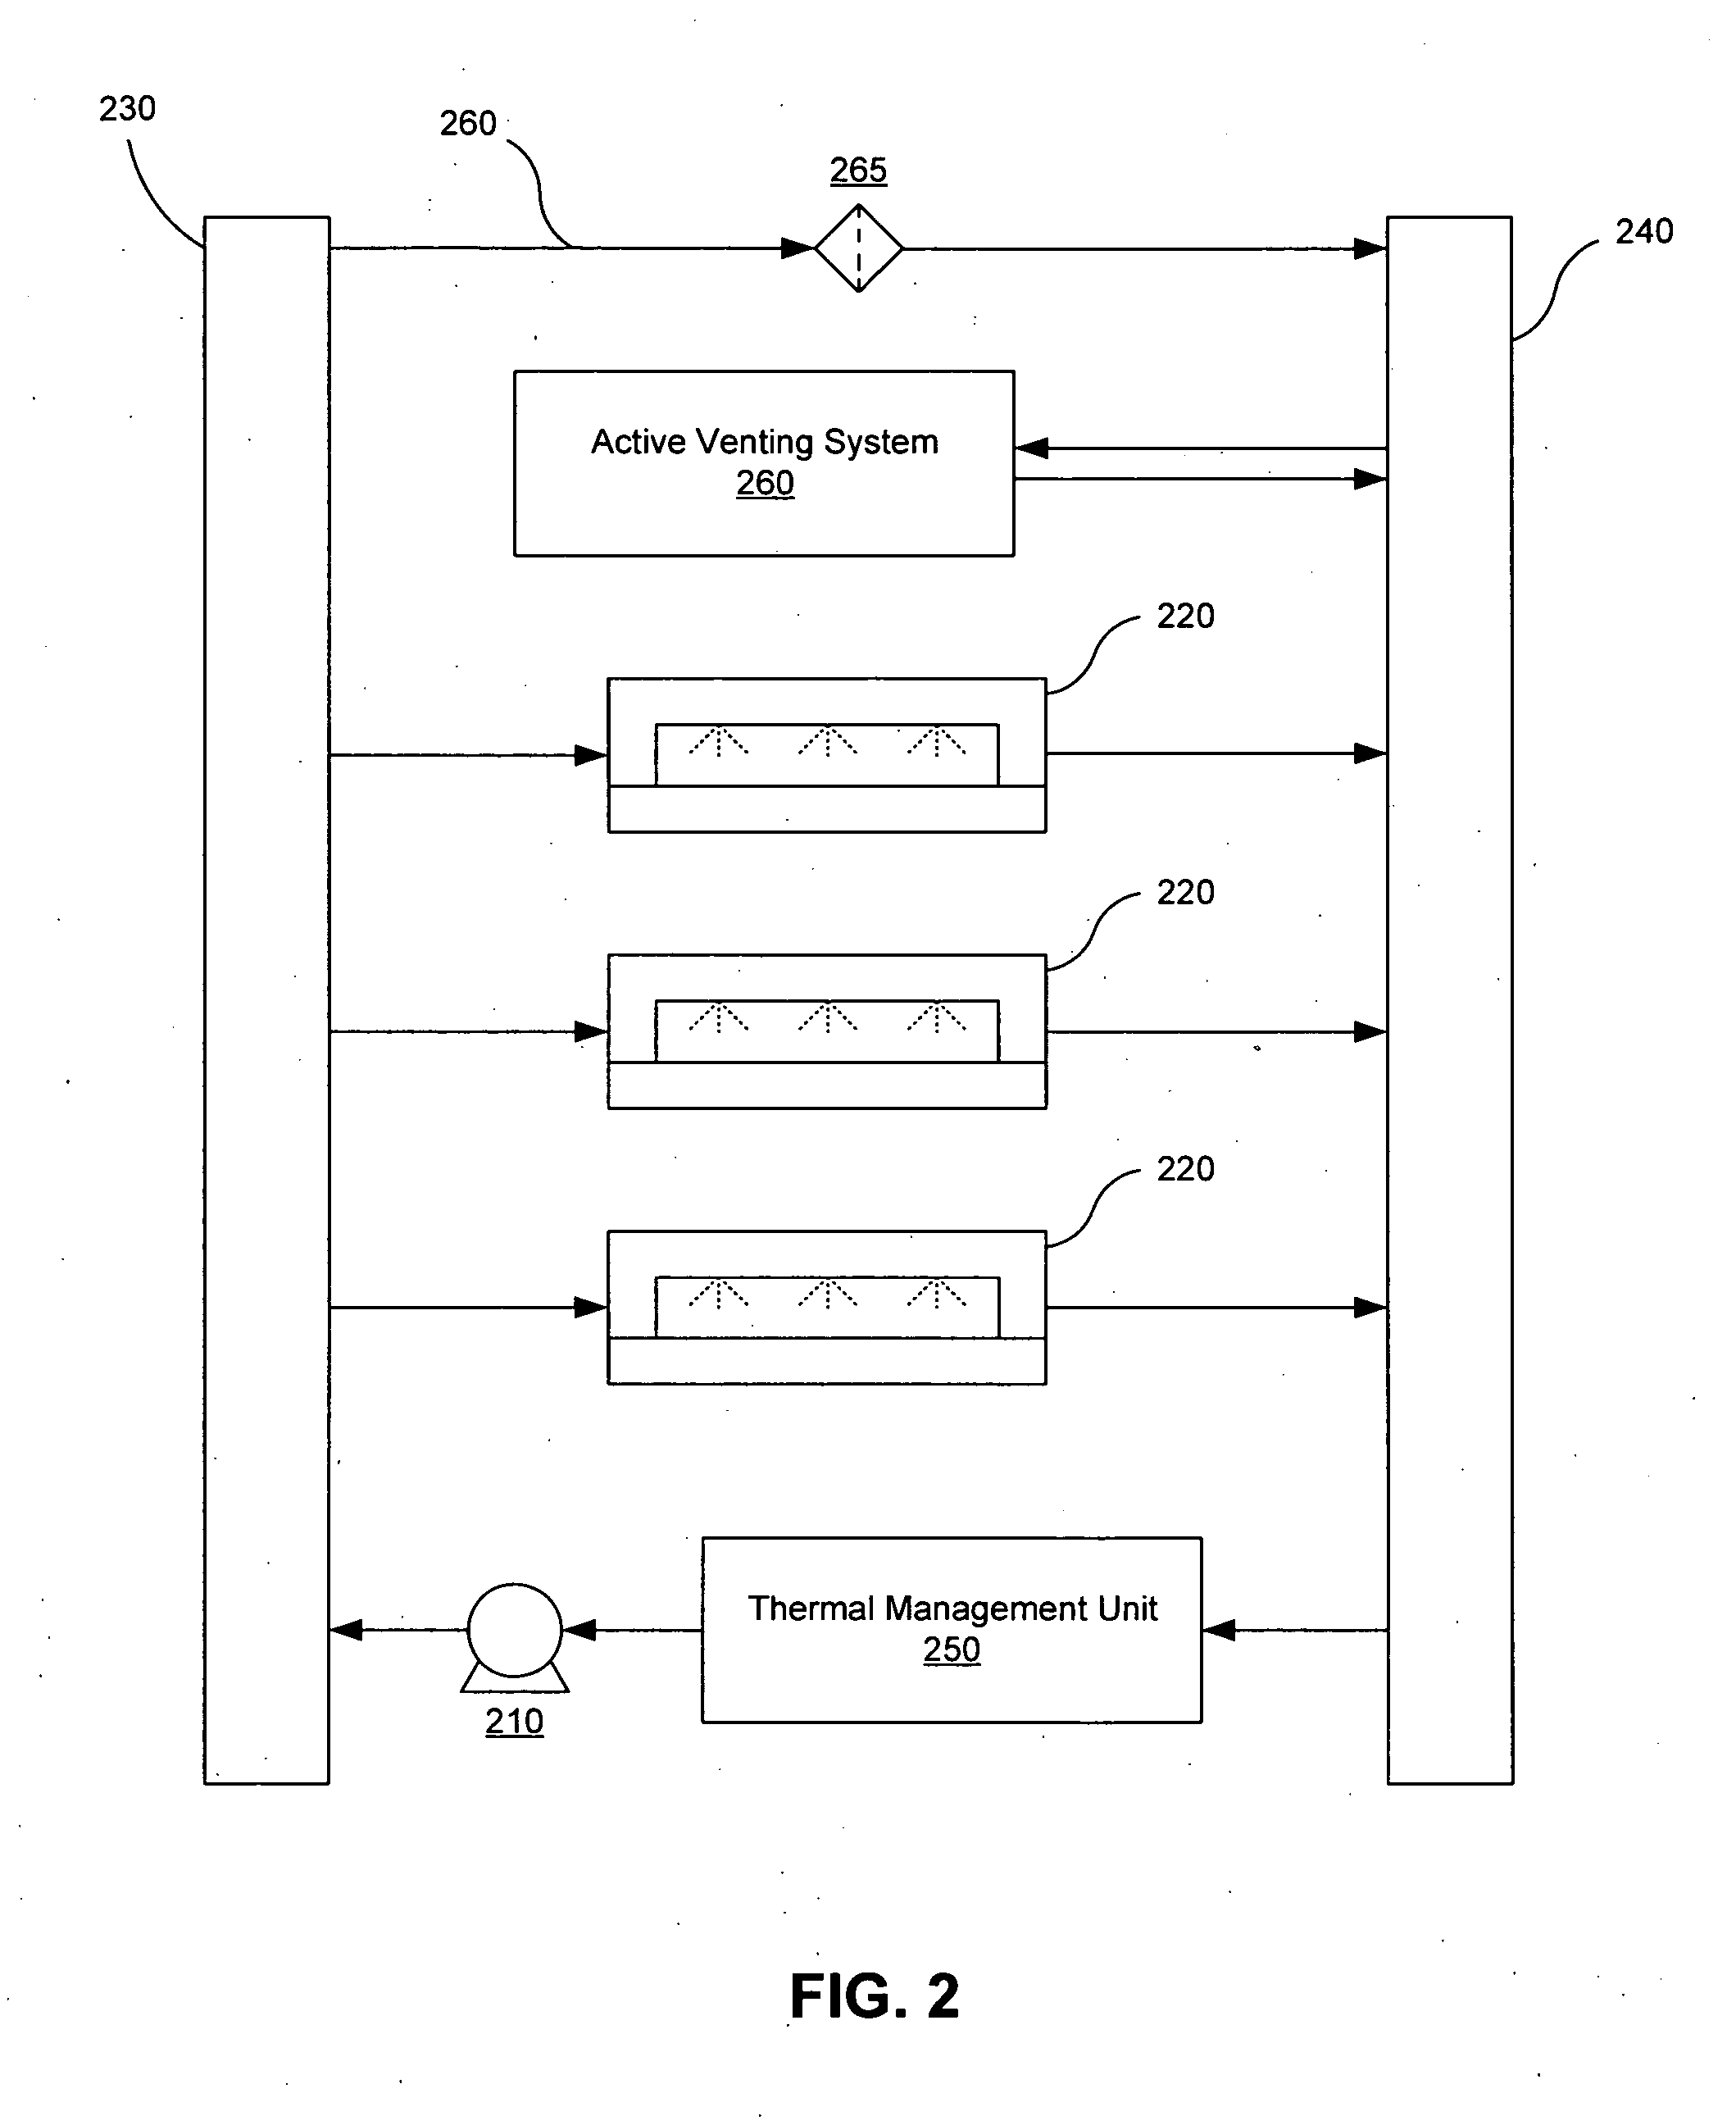 Two-phase liquid cooling system with active venting